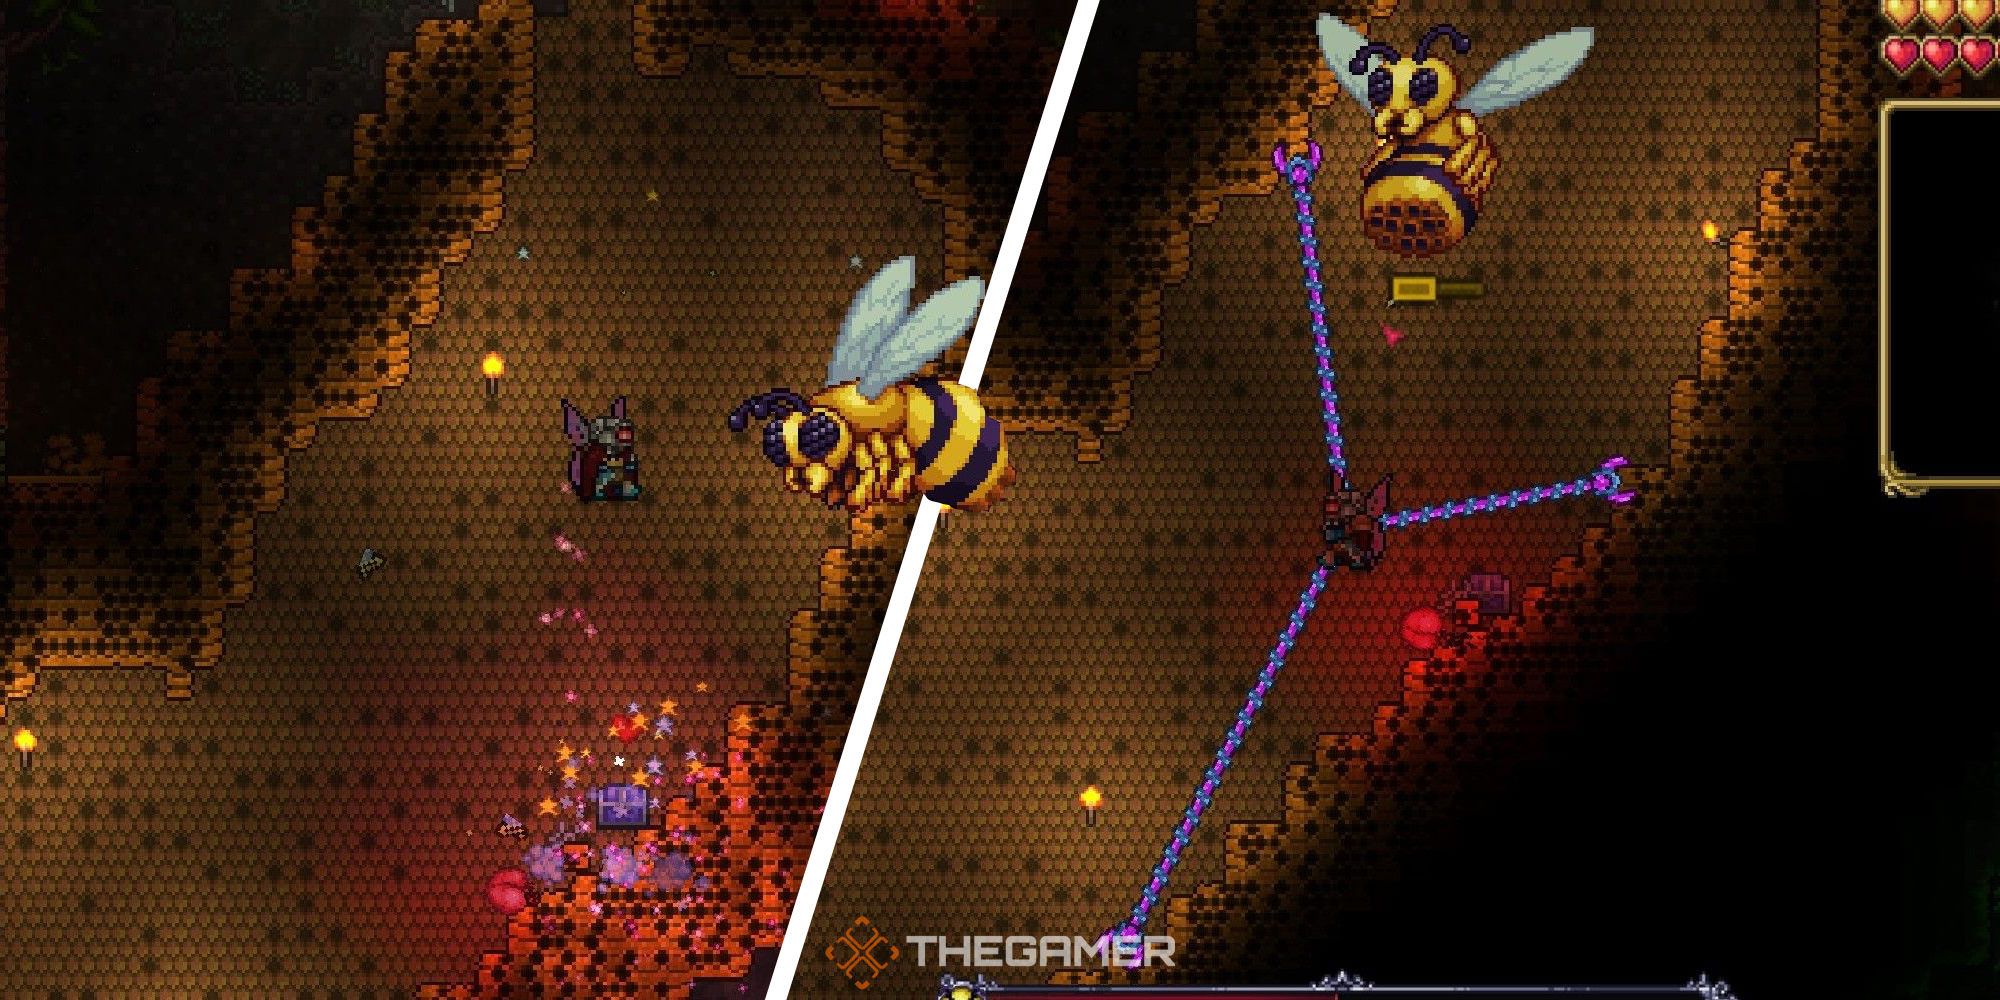 Terraria: Where to Find and How to Defeat the Queen Bee